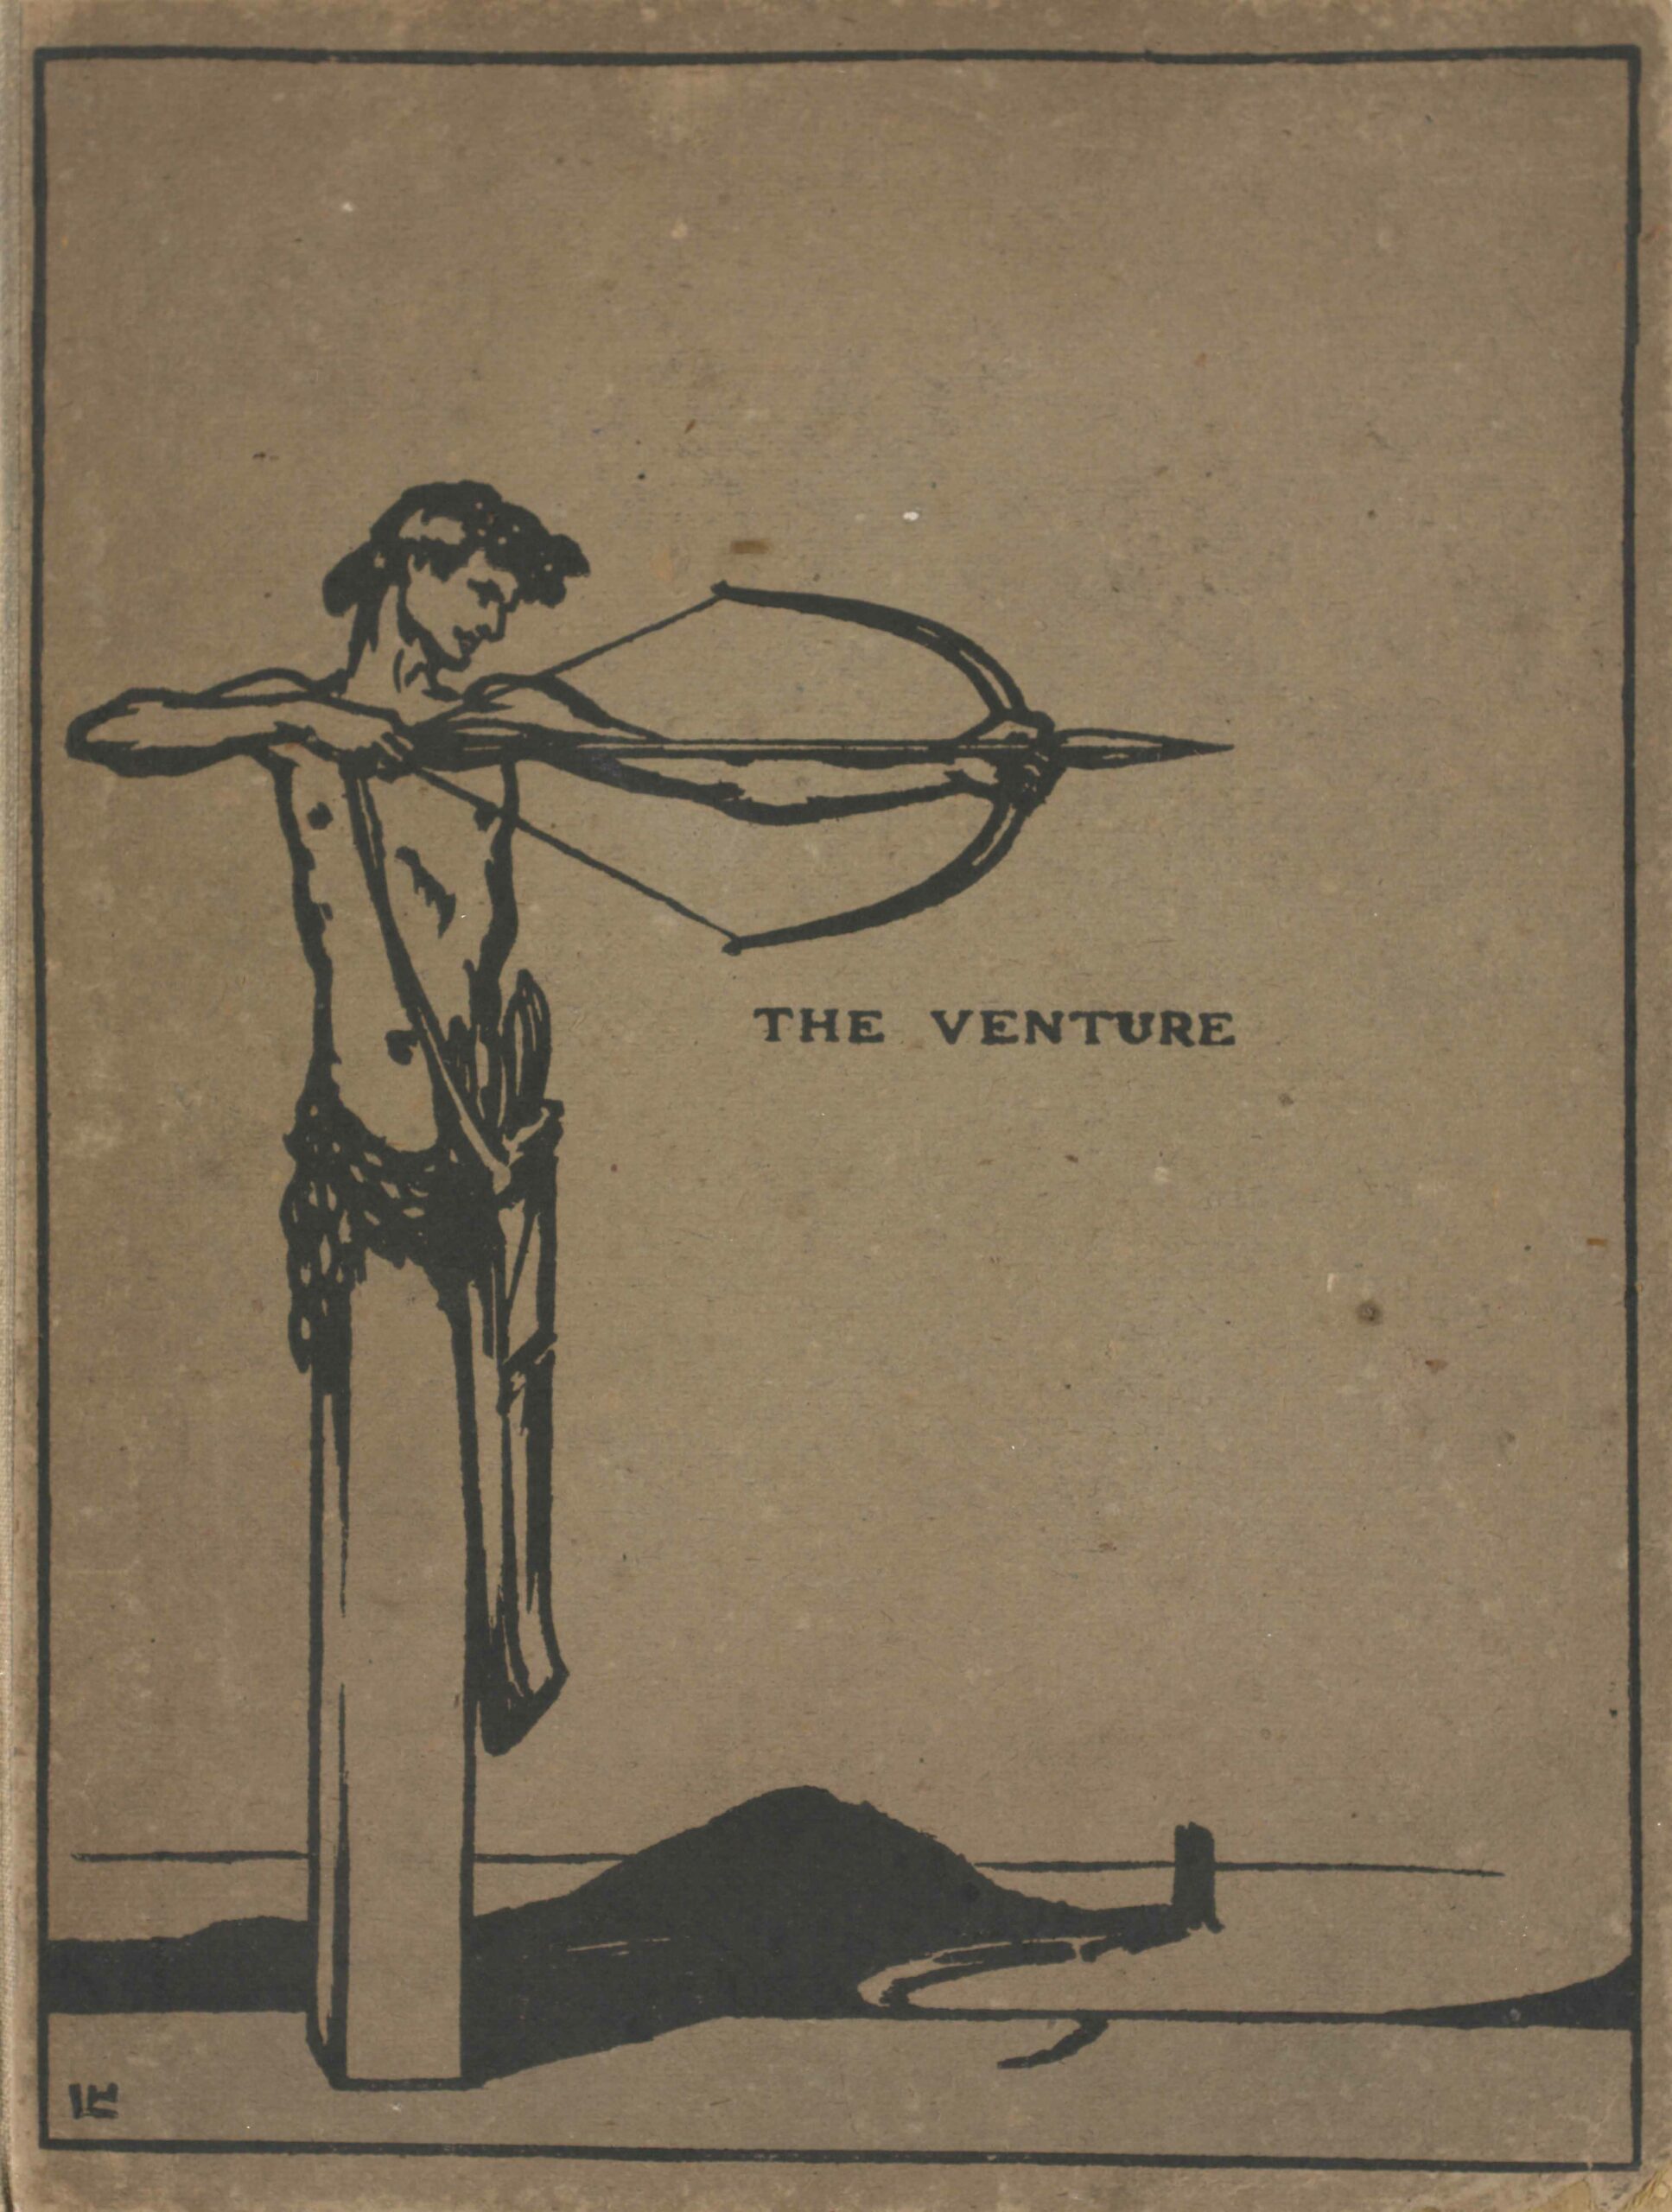 The image is in portrait orientation and positioned on the left to fit the length of the cover. The image is printed in black on brown boards. Atop a rectangular column, the upper body of a man with short, dark hair is positioned upright and facing forward (such a column is called a herm). The man’s head is turned to the right and slightly downwards. He is drawing an arrow; he is using his left arm to balance the bow and his right hand to pull the arrow back. The man is wearing a small knotted fabric on his waistline and a strap across his chest is attached to a bag or quiver with arrows. In the background there is a dark coastline receding towards the left side of the image, a dock at its end, and the outline of a large hill. The man’s shadow is on the right ground beneath him. “The Venture” is transcribed in small capital letters at the center of the image, just below the figure’s bow.